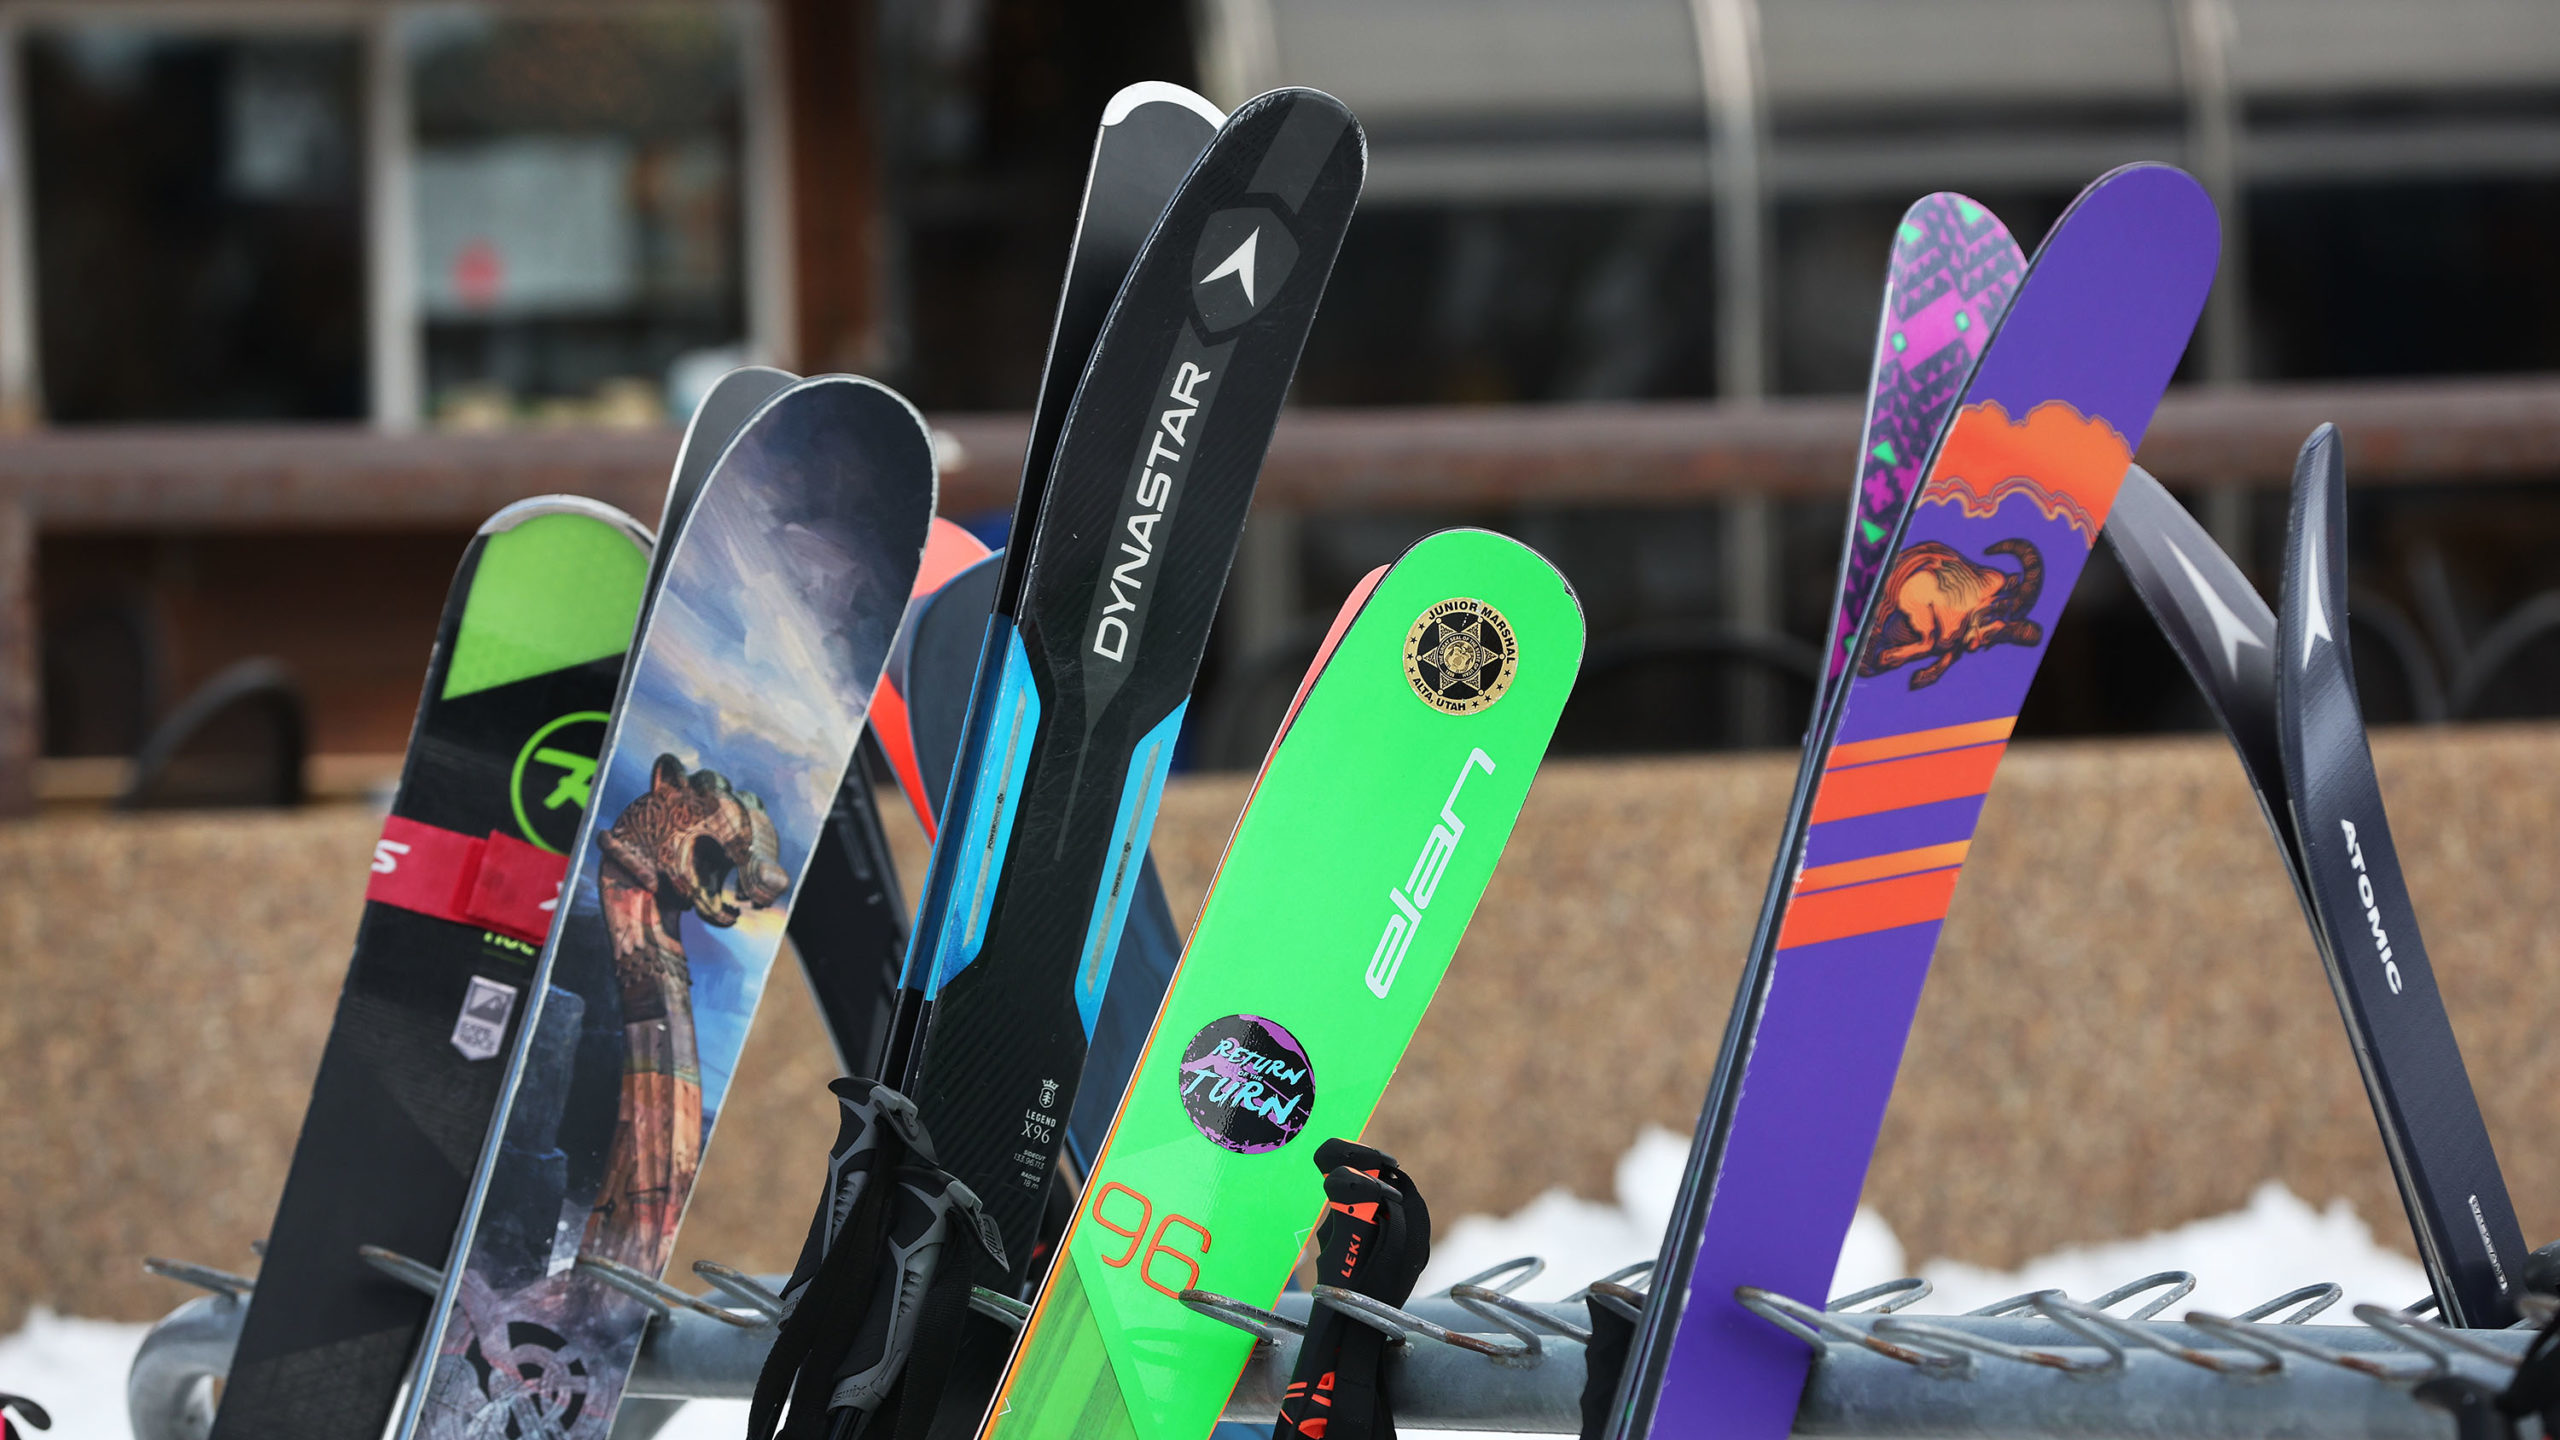 skis, which use ski wax, are pictured standing up in a storage area...